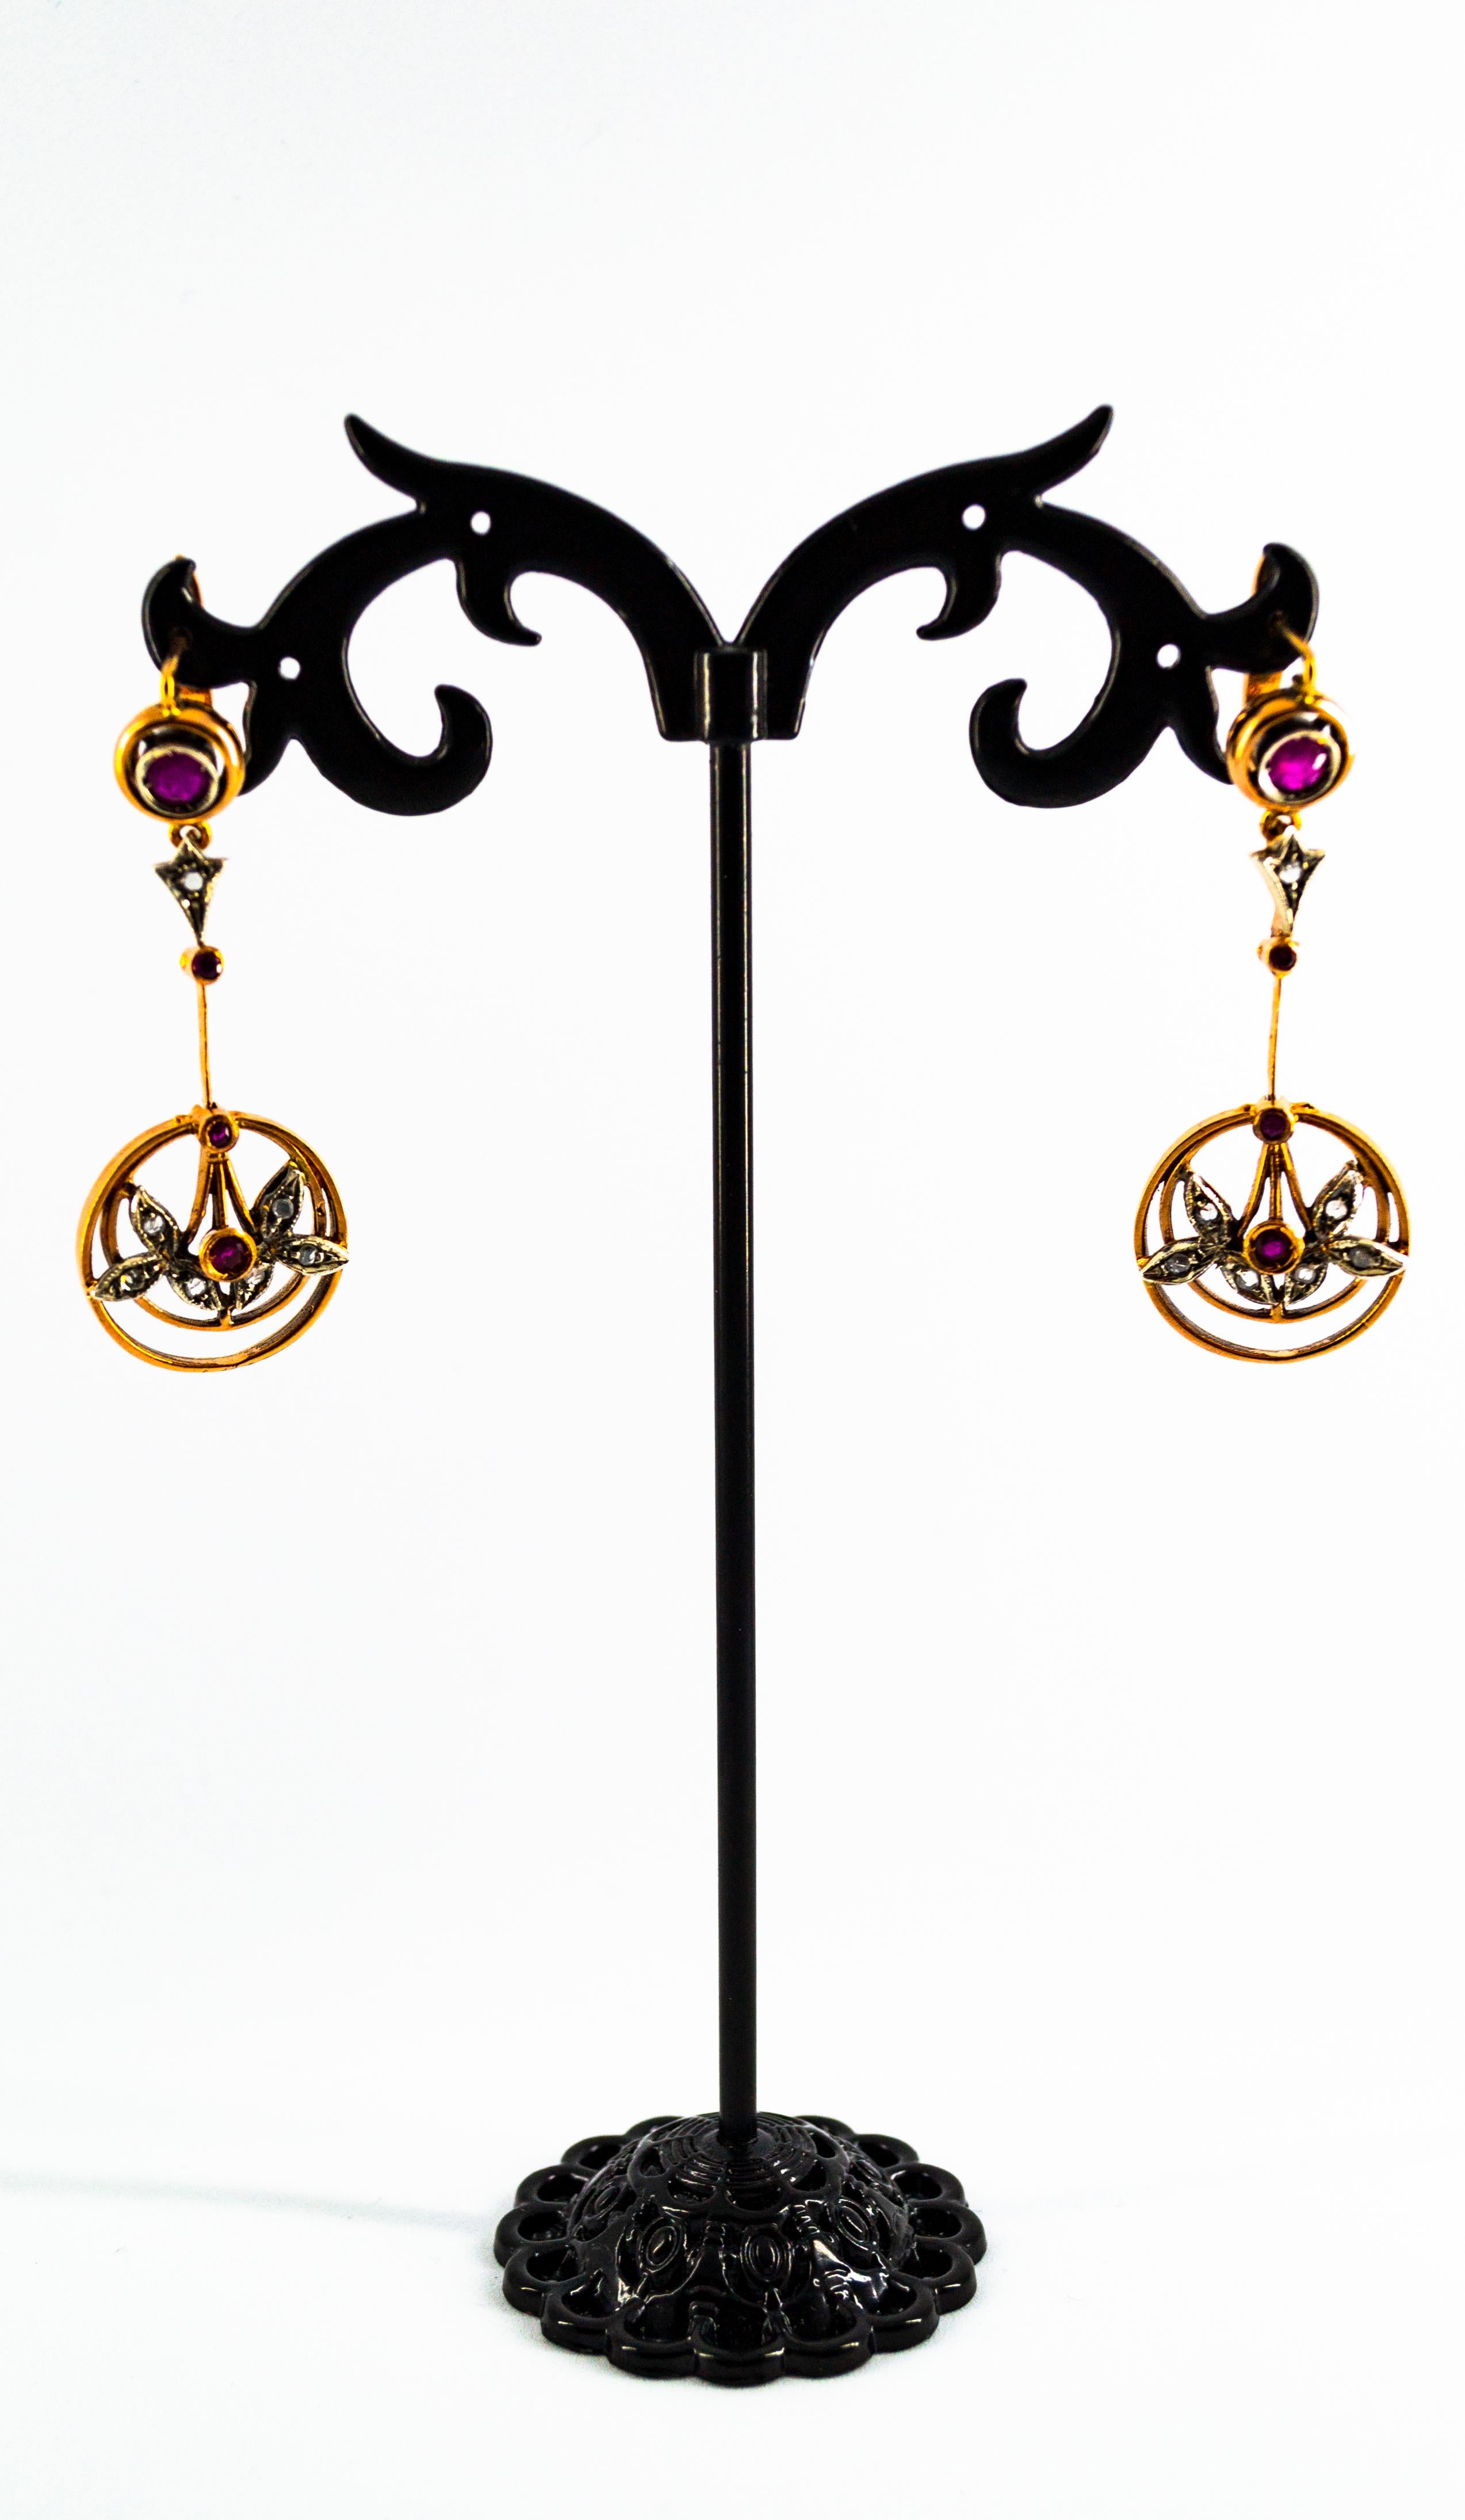 These Lever-Back Earrings are made of 9K Yellow Gold and Sterling Silver.
These Earrings have 0.10 Carats of White Rose Cut Diamonds.
These Earrings have also 0.70 Carat of Rubies.
These Earrings are available also with Emeralds or Blue